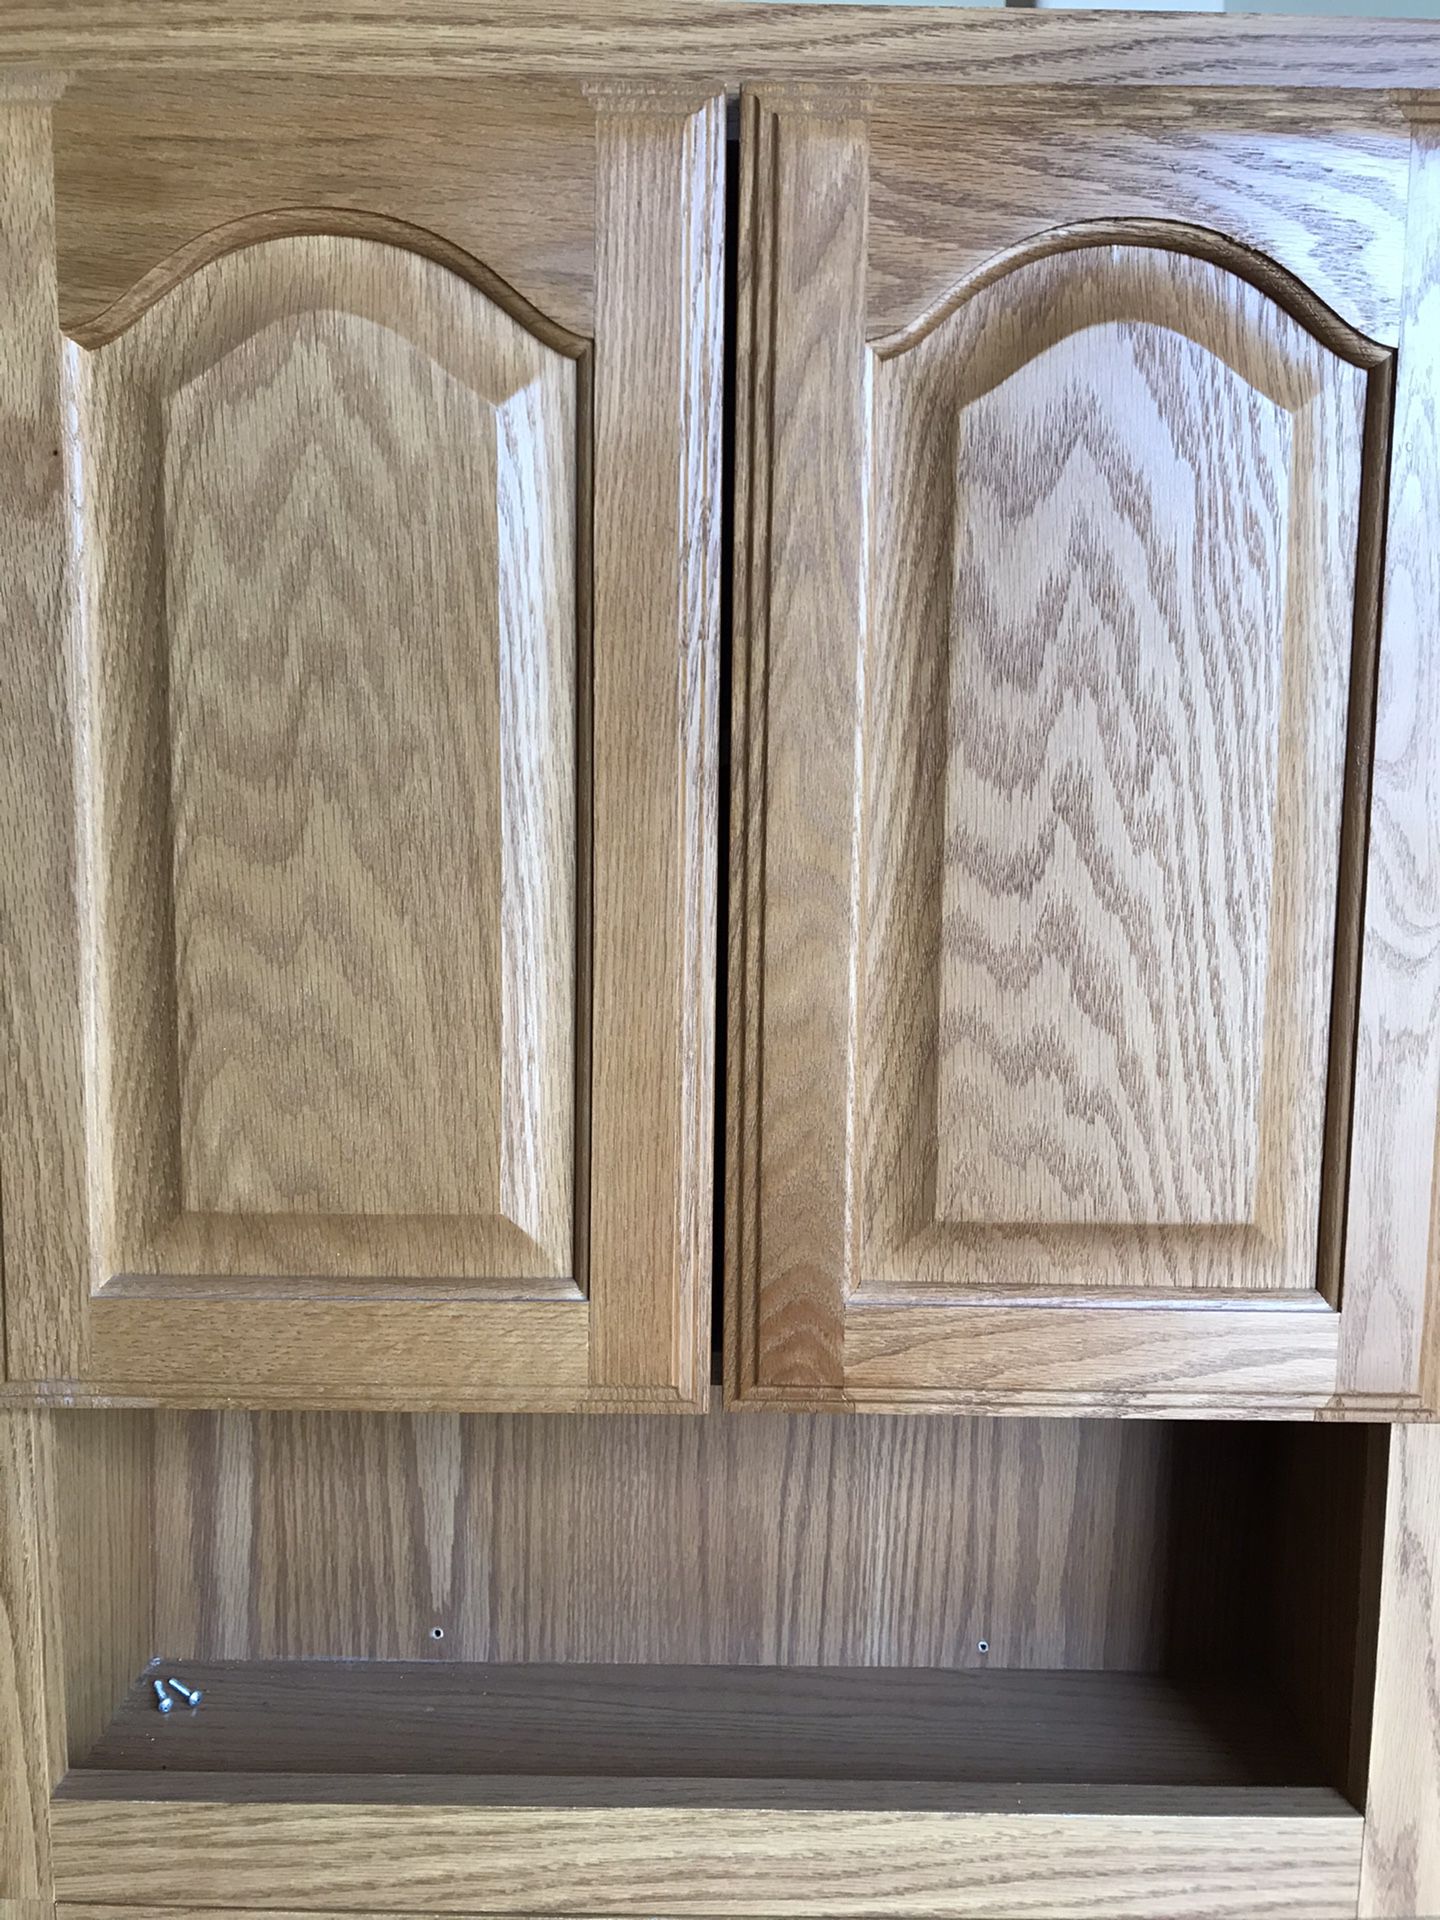 Wall cabinets